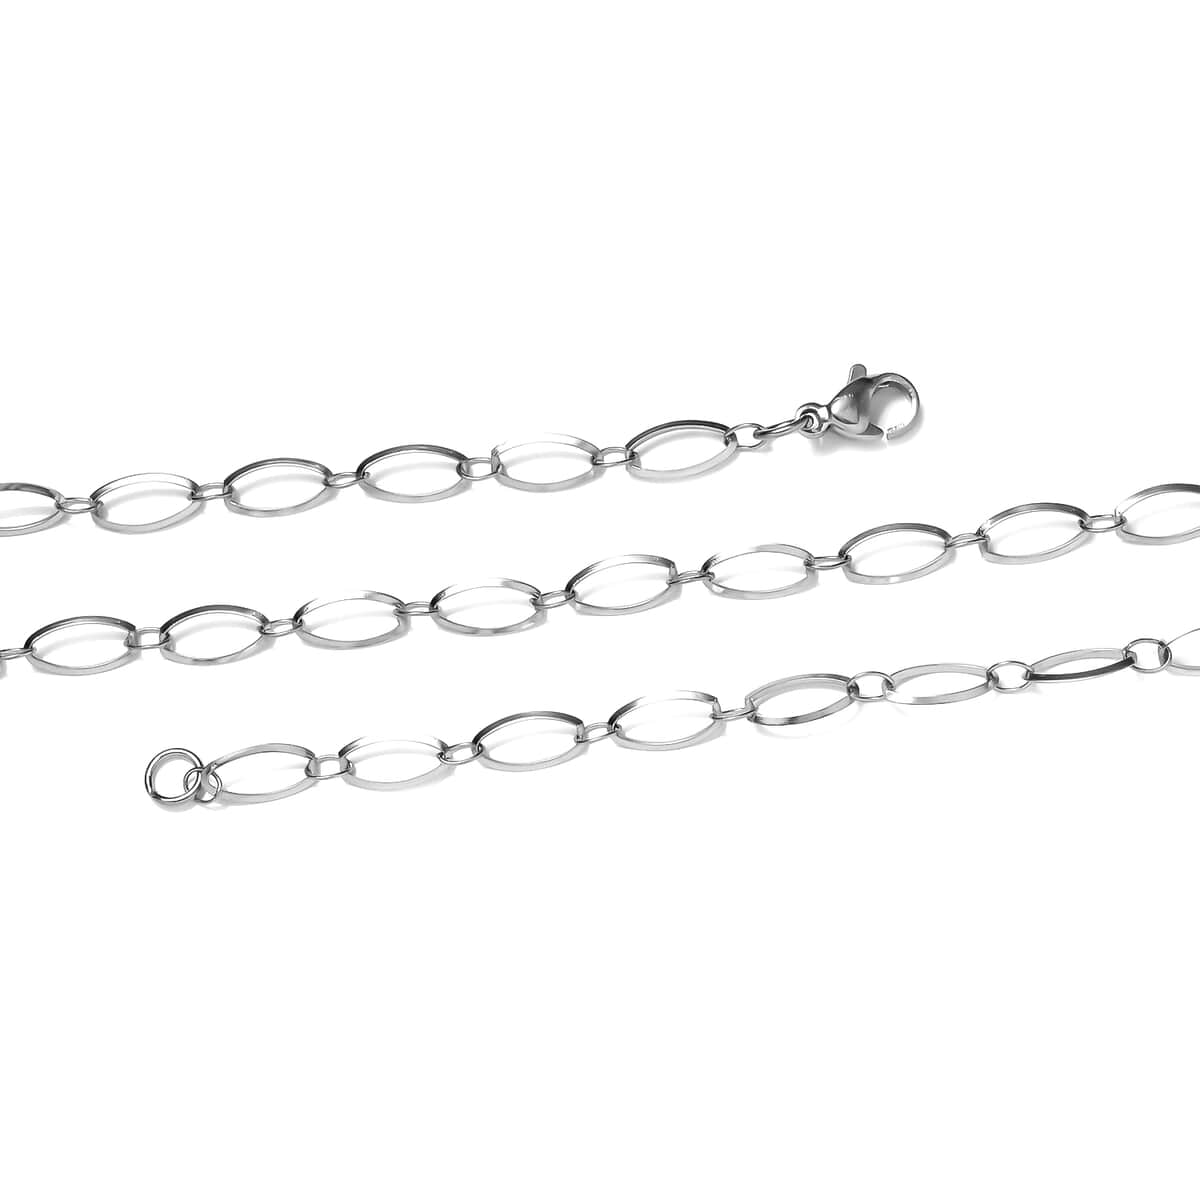 Set of 7, Beads, Wheat and Long Short Link Chain 3pcs Necklace 20 Inches, 3pcs Bracelet (7.5-8.0In) and 1pc Magnetic Lock in Stainless Steel image number 3